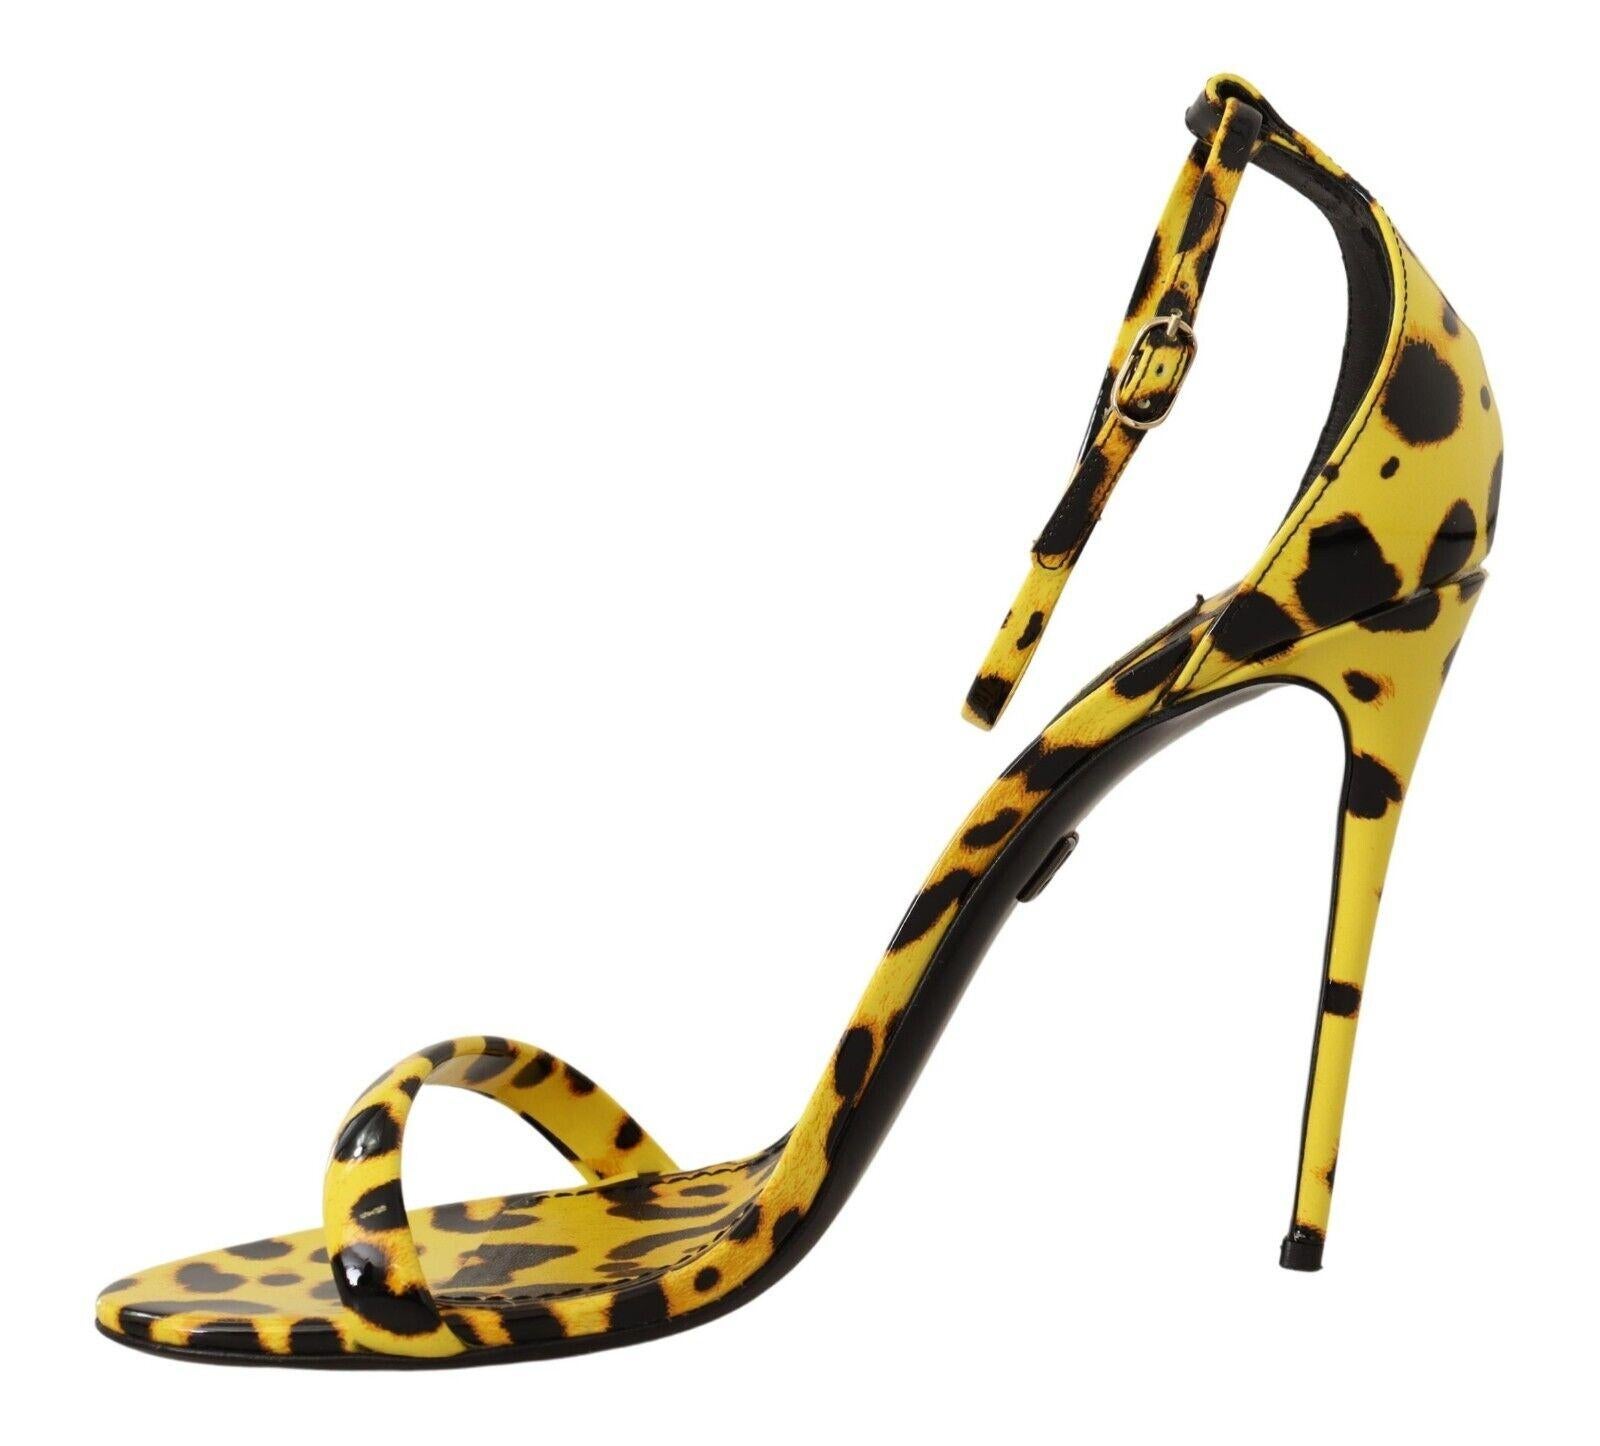 DOLCE & GABBANA

Gorgeous brand new with tags, 100% Authentic Dolce & Gabbana Yellow and black heeled sandals. Crafted from leather, this model features a buckled ankle strap, animal pattern and a black leather sole.

Model: Heels Sandals
Material: